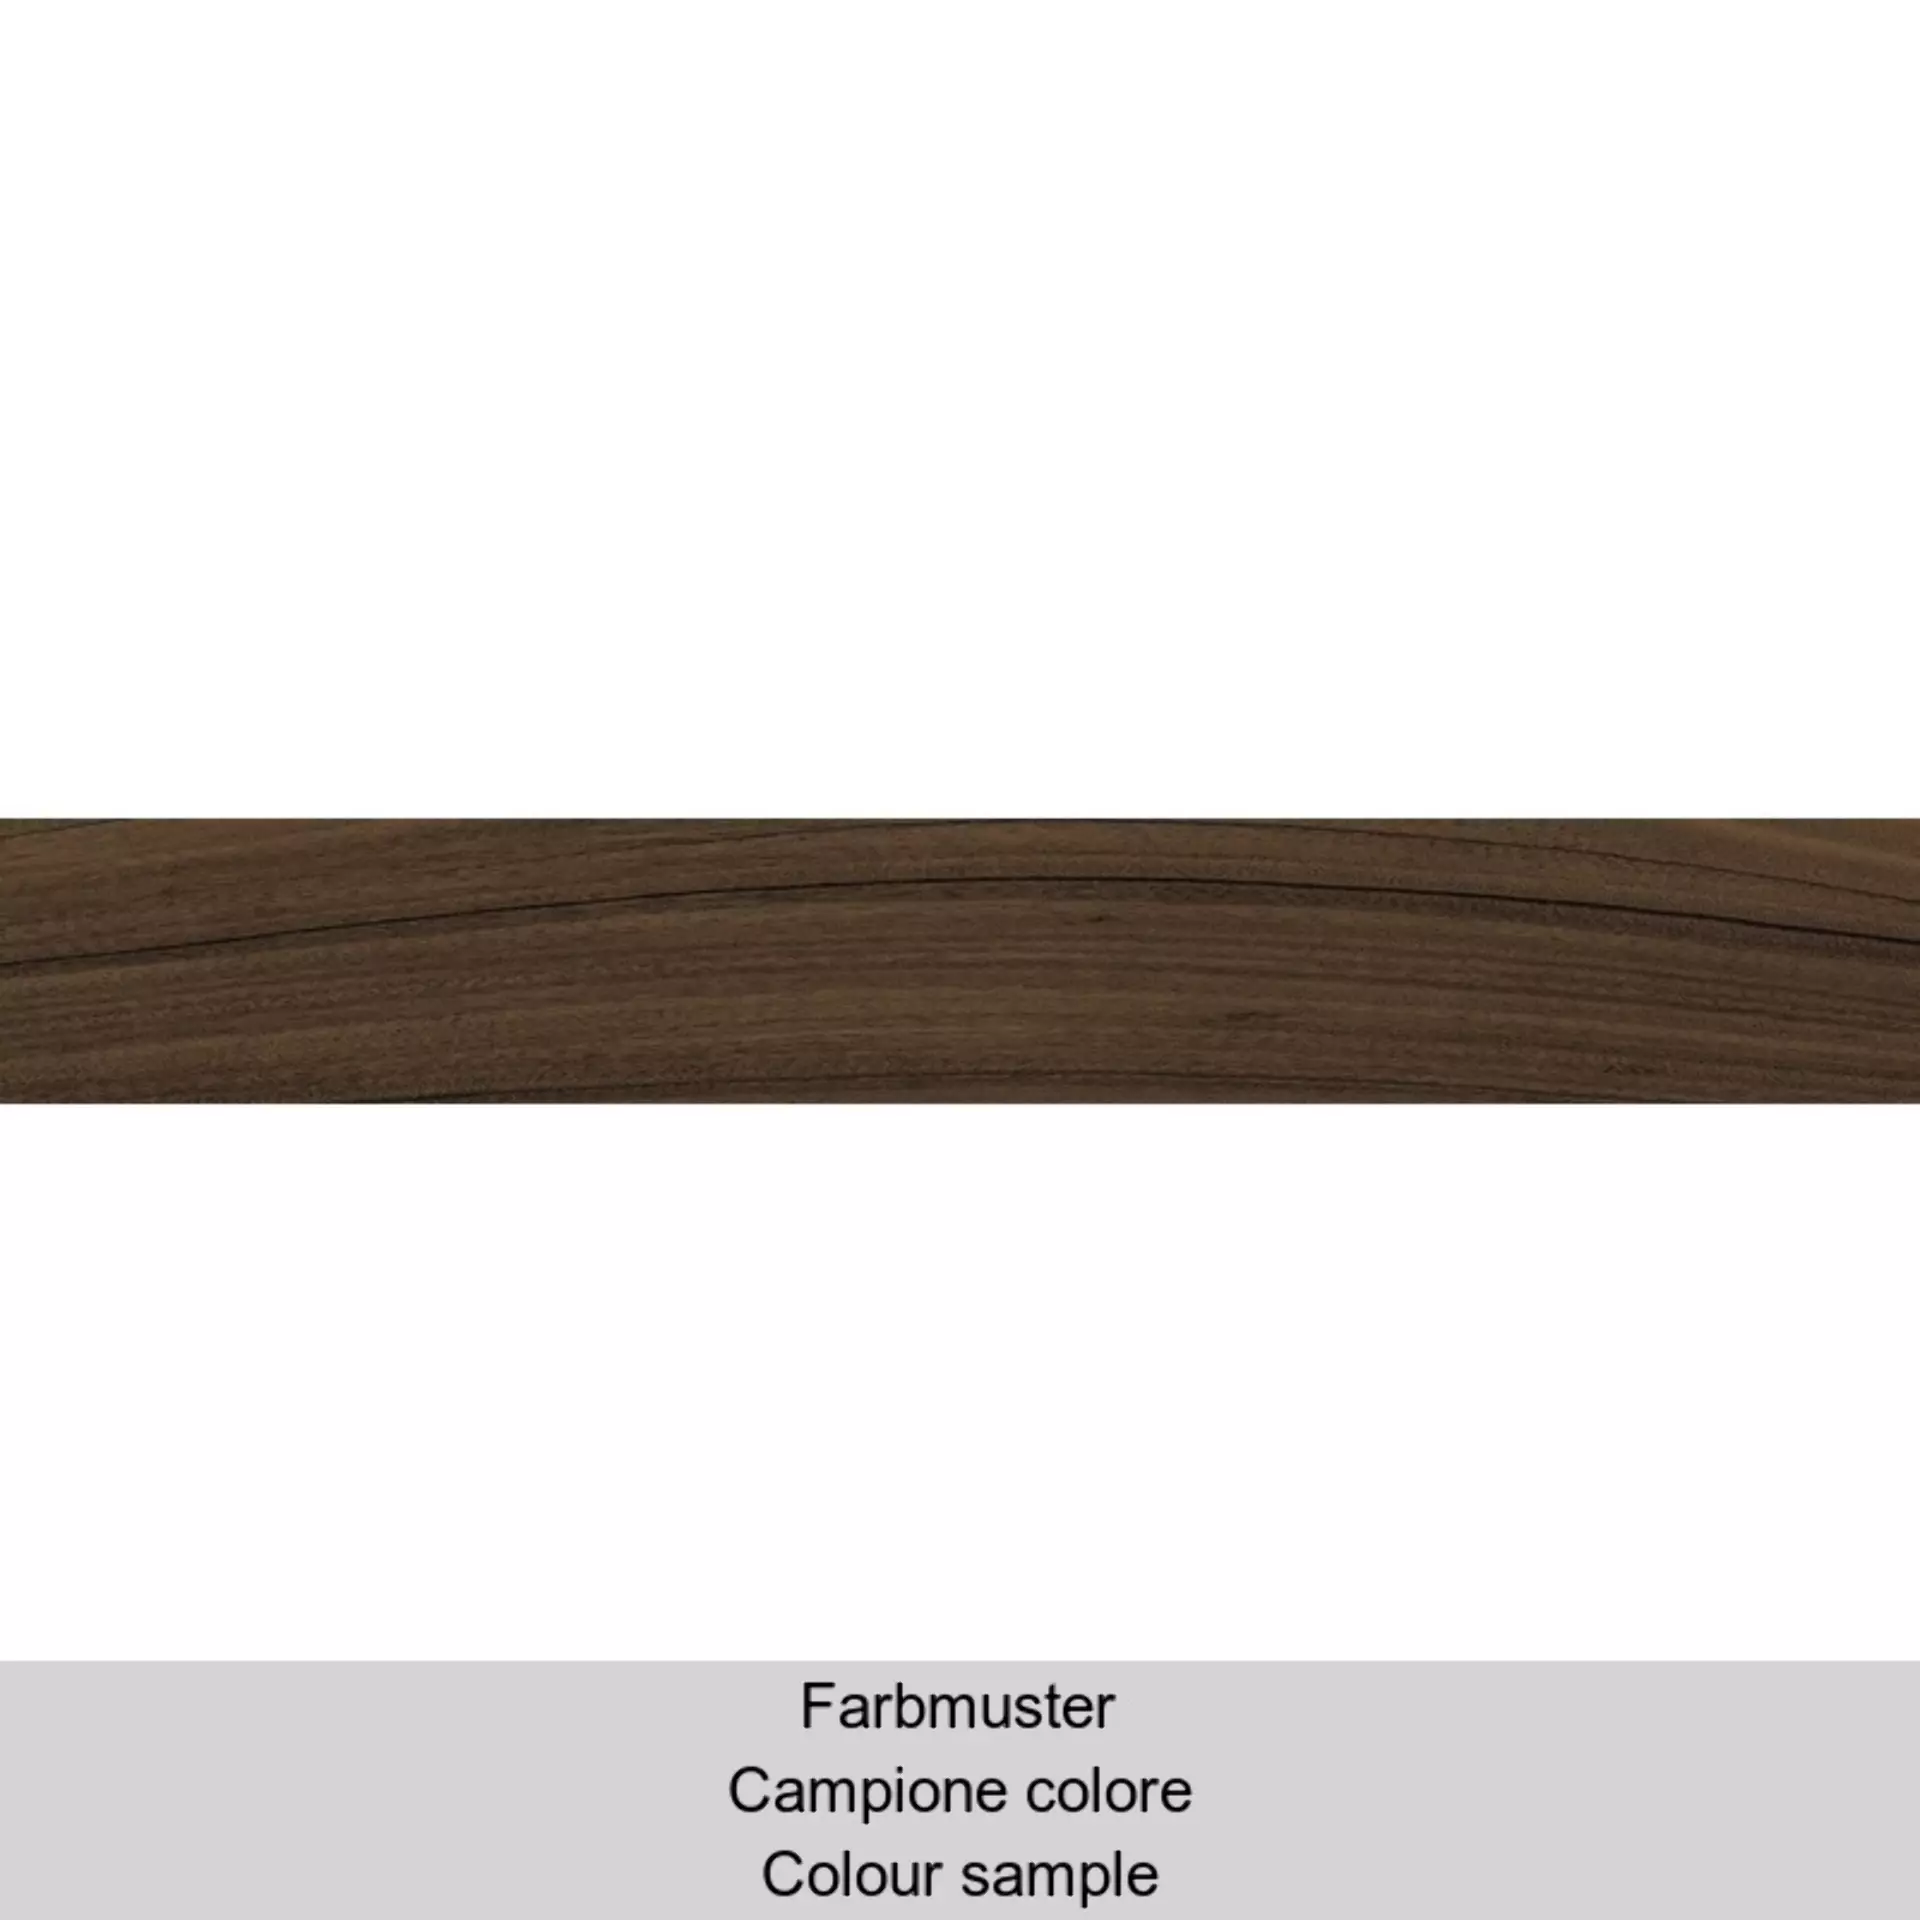 Coem Afromosia Intenso Naturale 0AF197R 15,1x90,6cm rectified 10mm